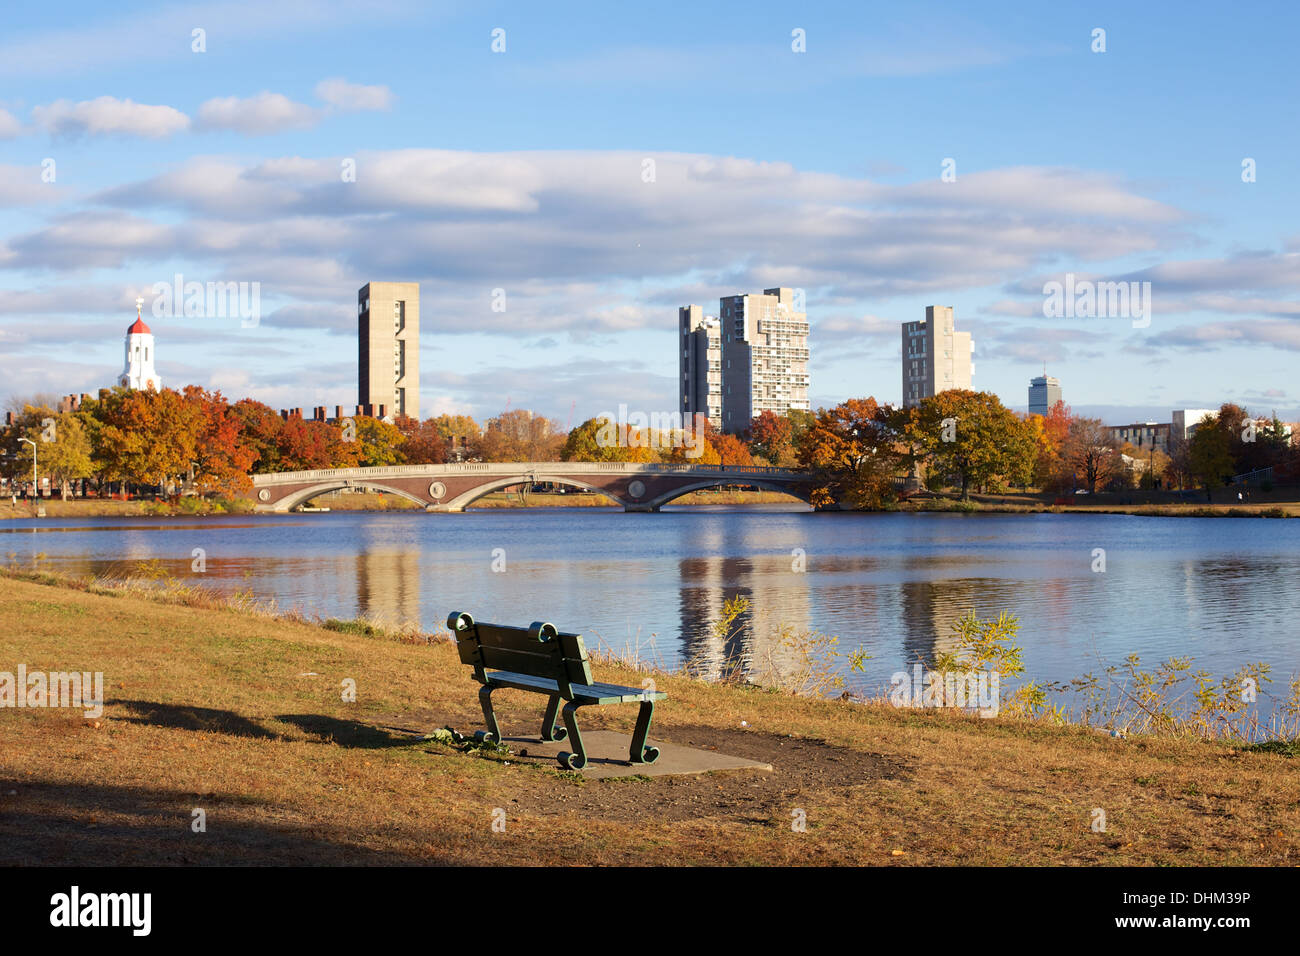 View across the Charles river on a beautiful fall day near Harvard University campus in Cambridge, MA, USA in November 2013. Stock Photo